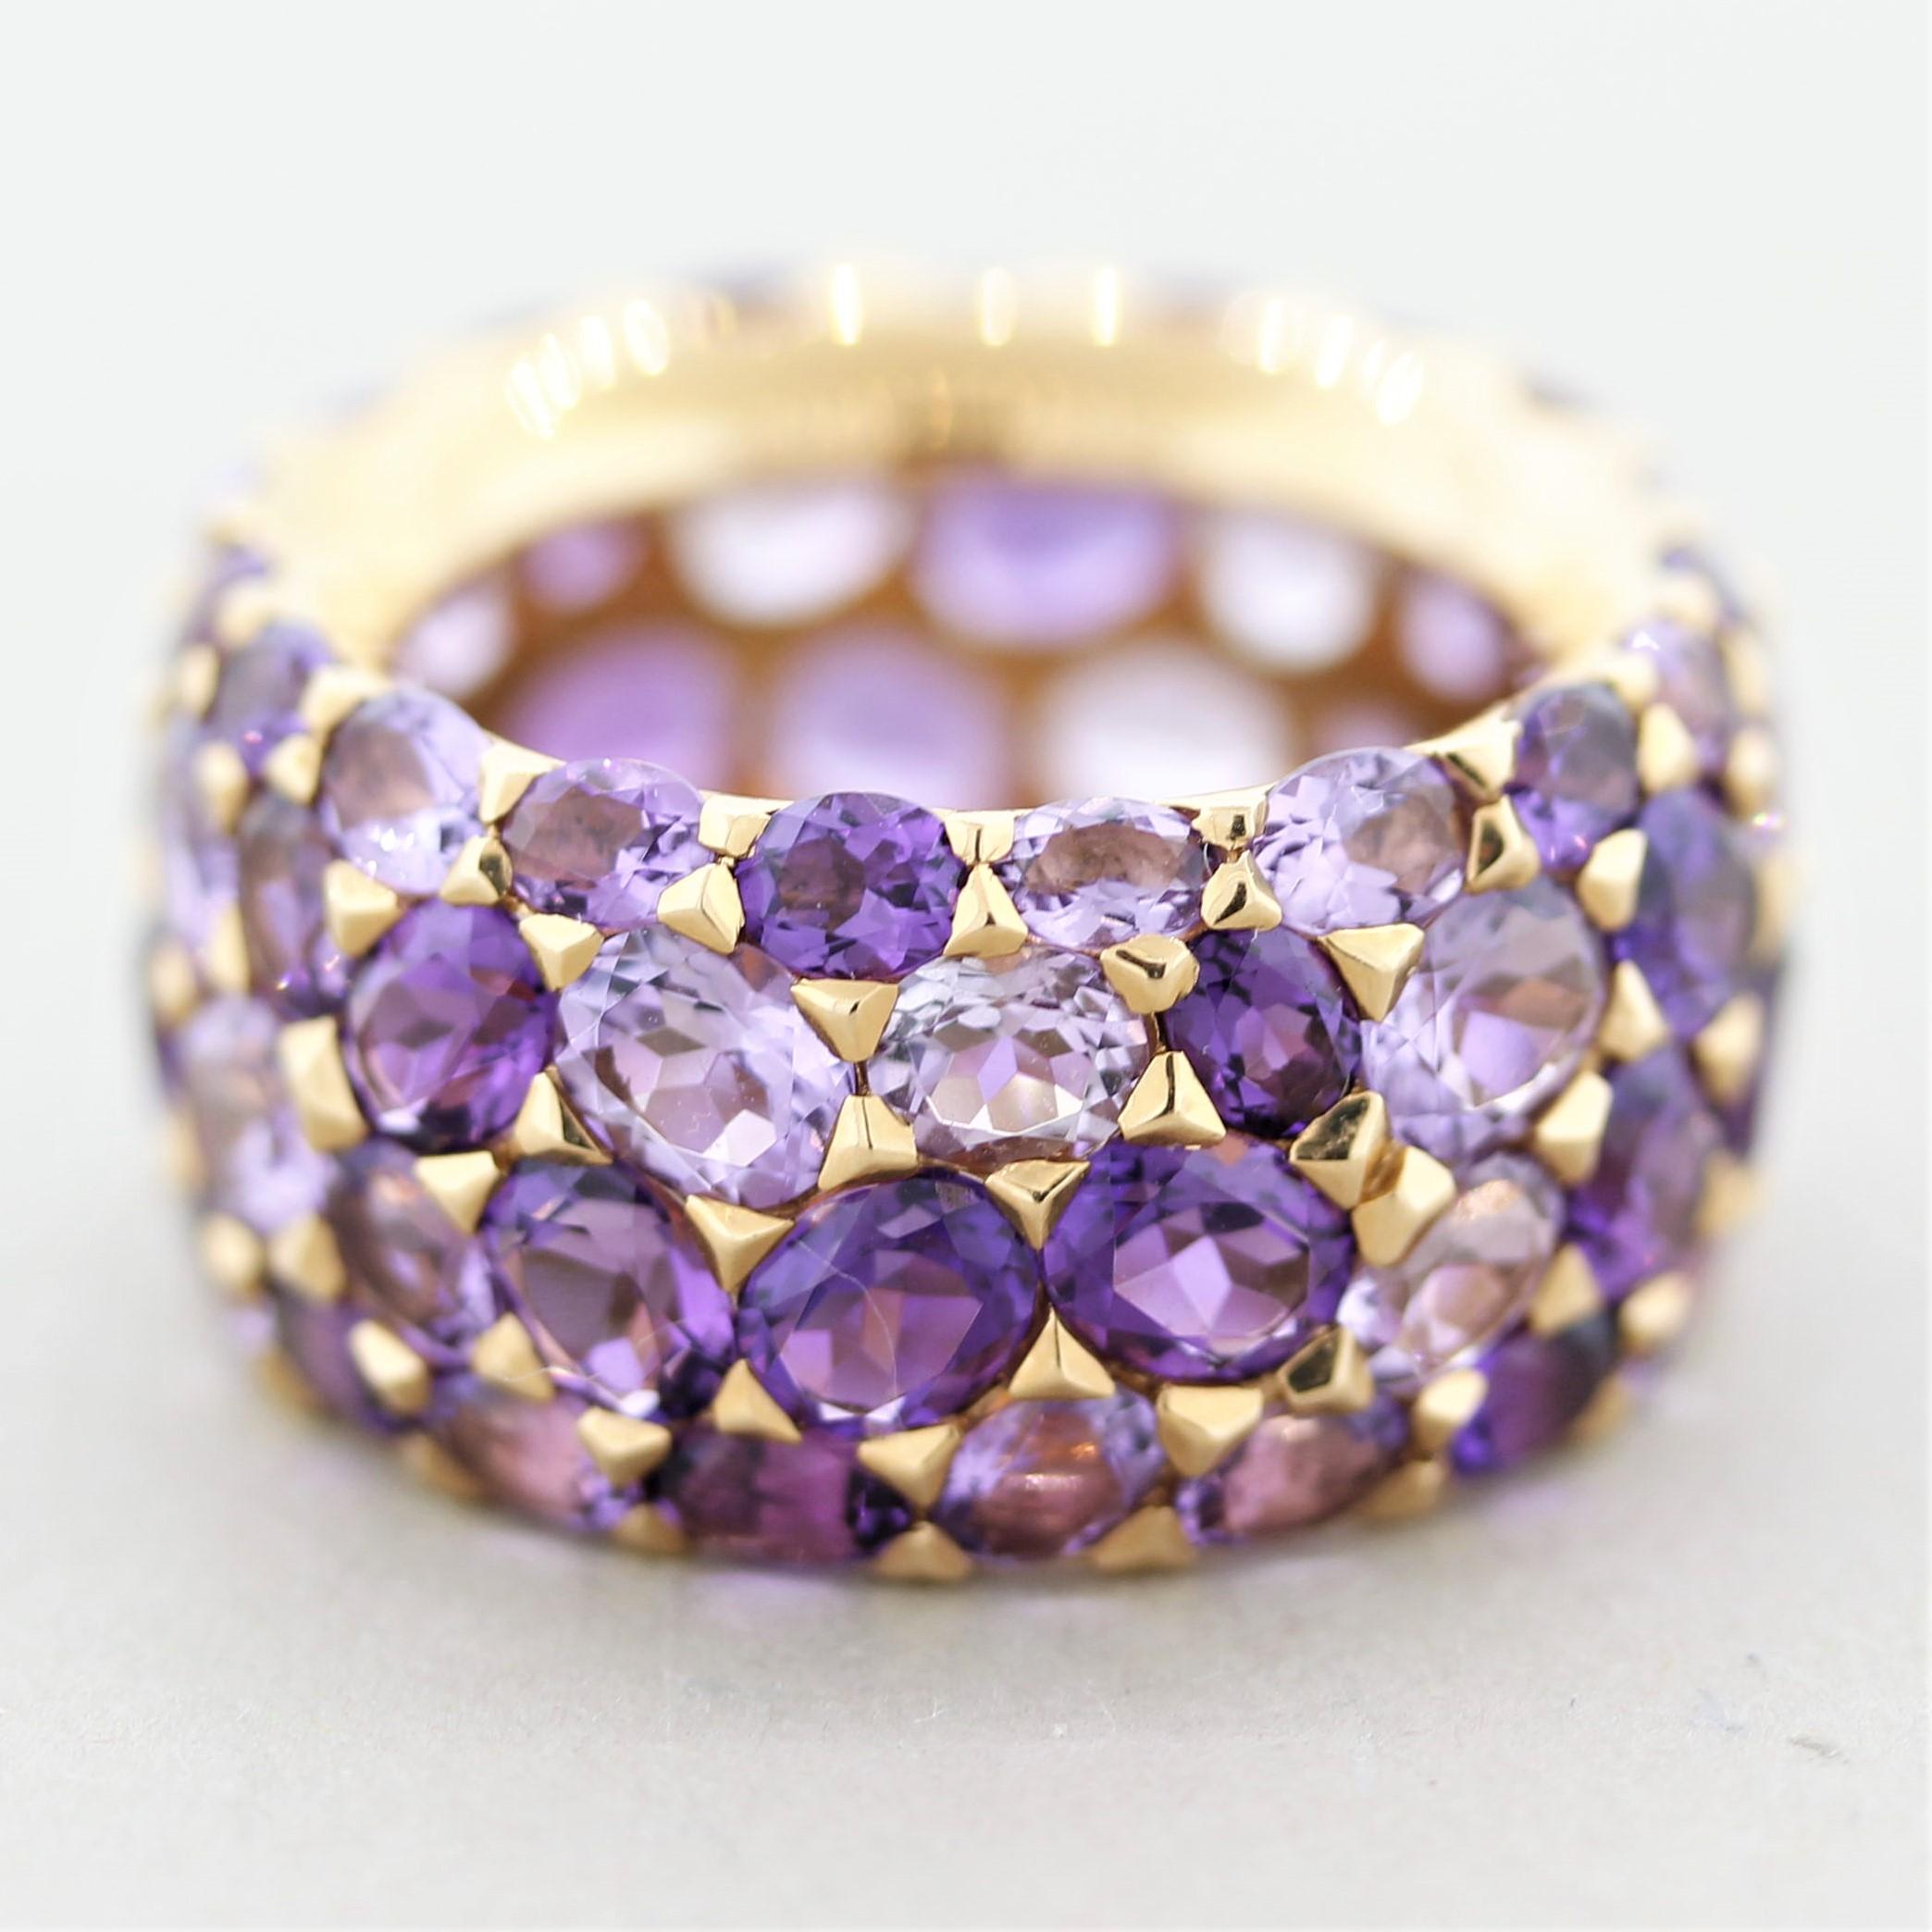 A modern and stylish wide eternity band featuring 12.90 carats of amethyst of light and dark colors. All the stones are oval shapes but half of them are a lighter pinkish-purple while the other half is a deeper royal purple color. The contrast gives